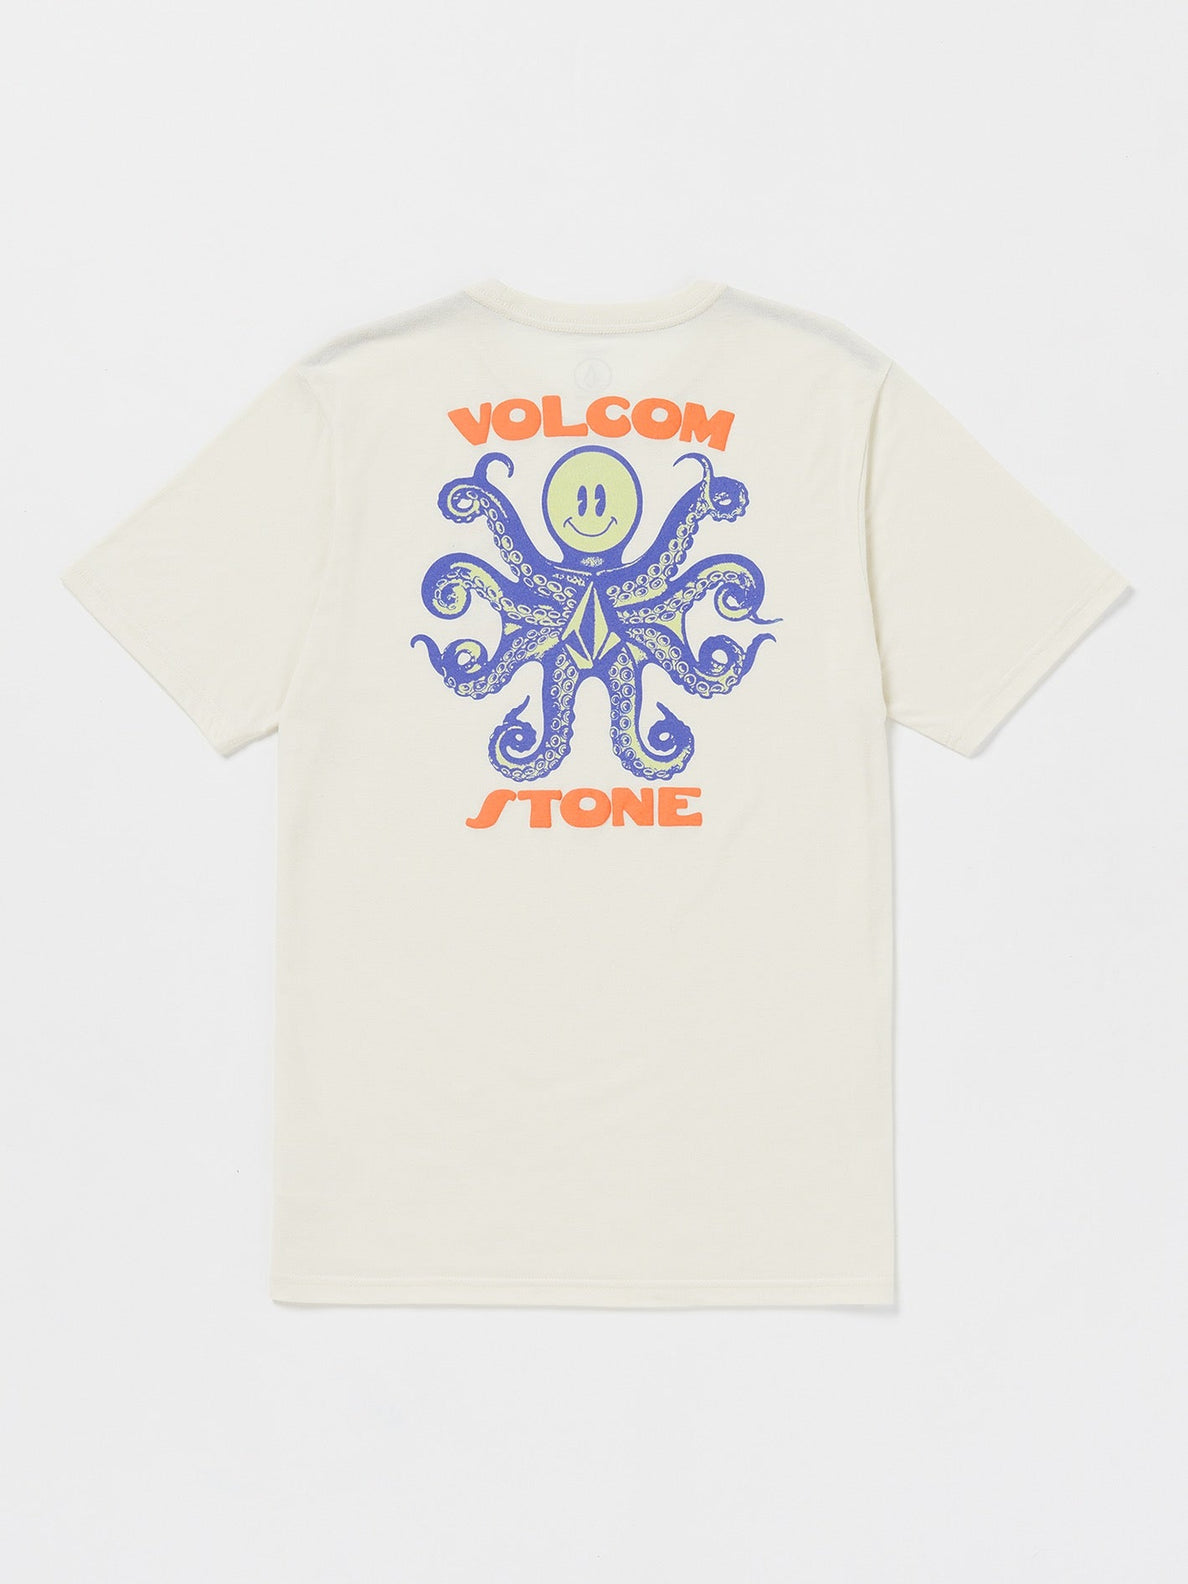 Octoparty Short Sleeve Tee - Off White Heather